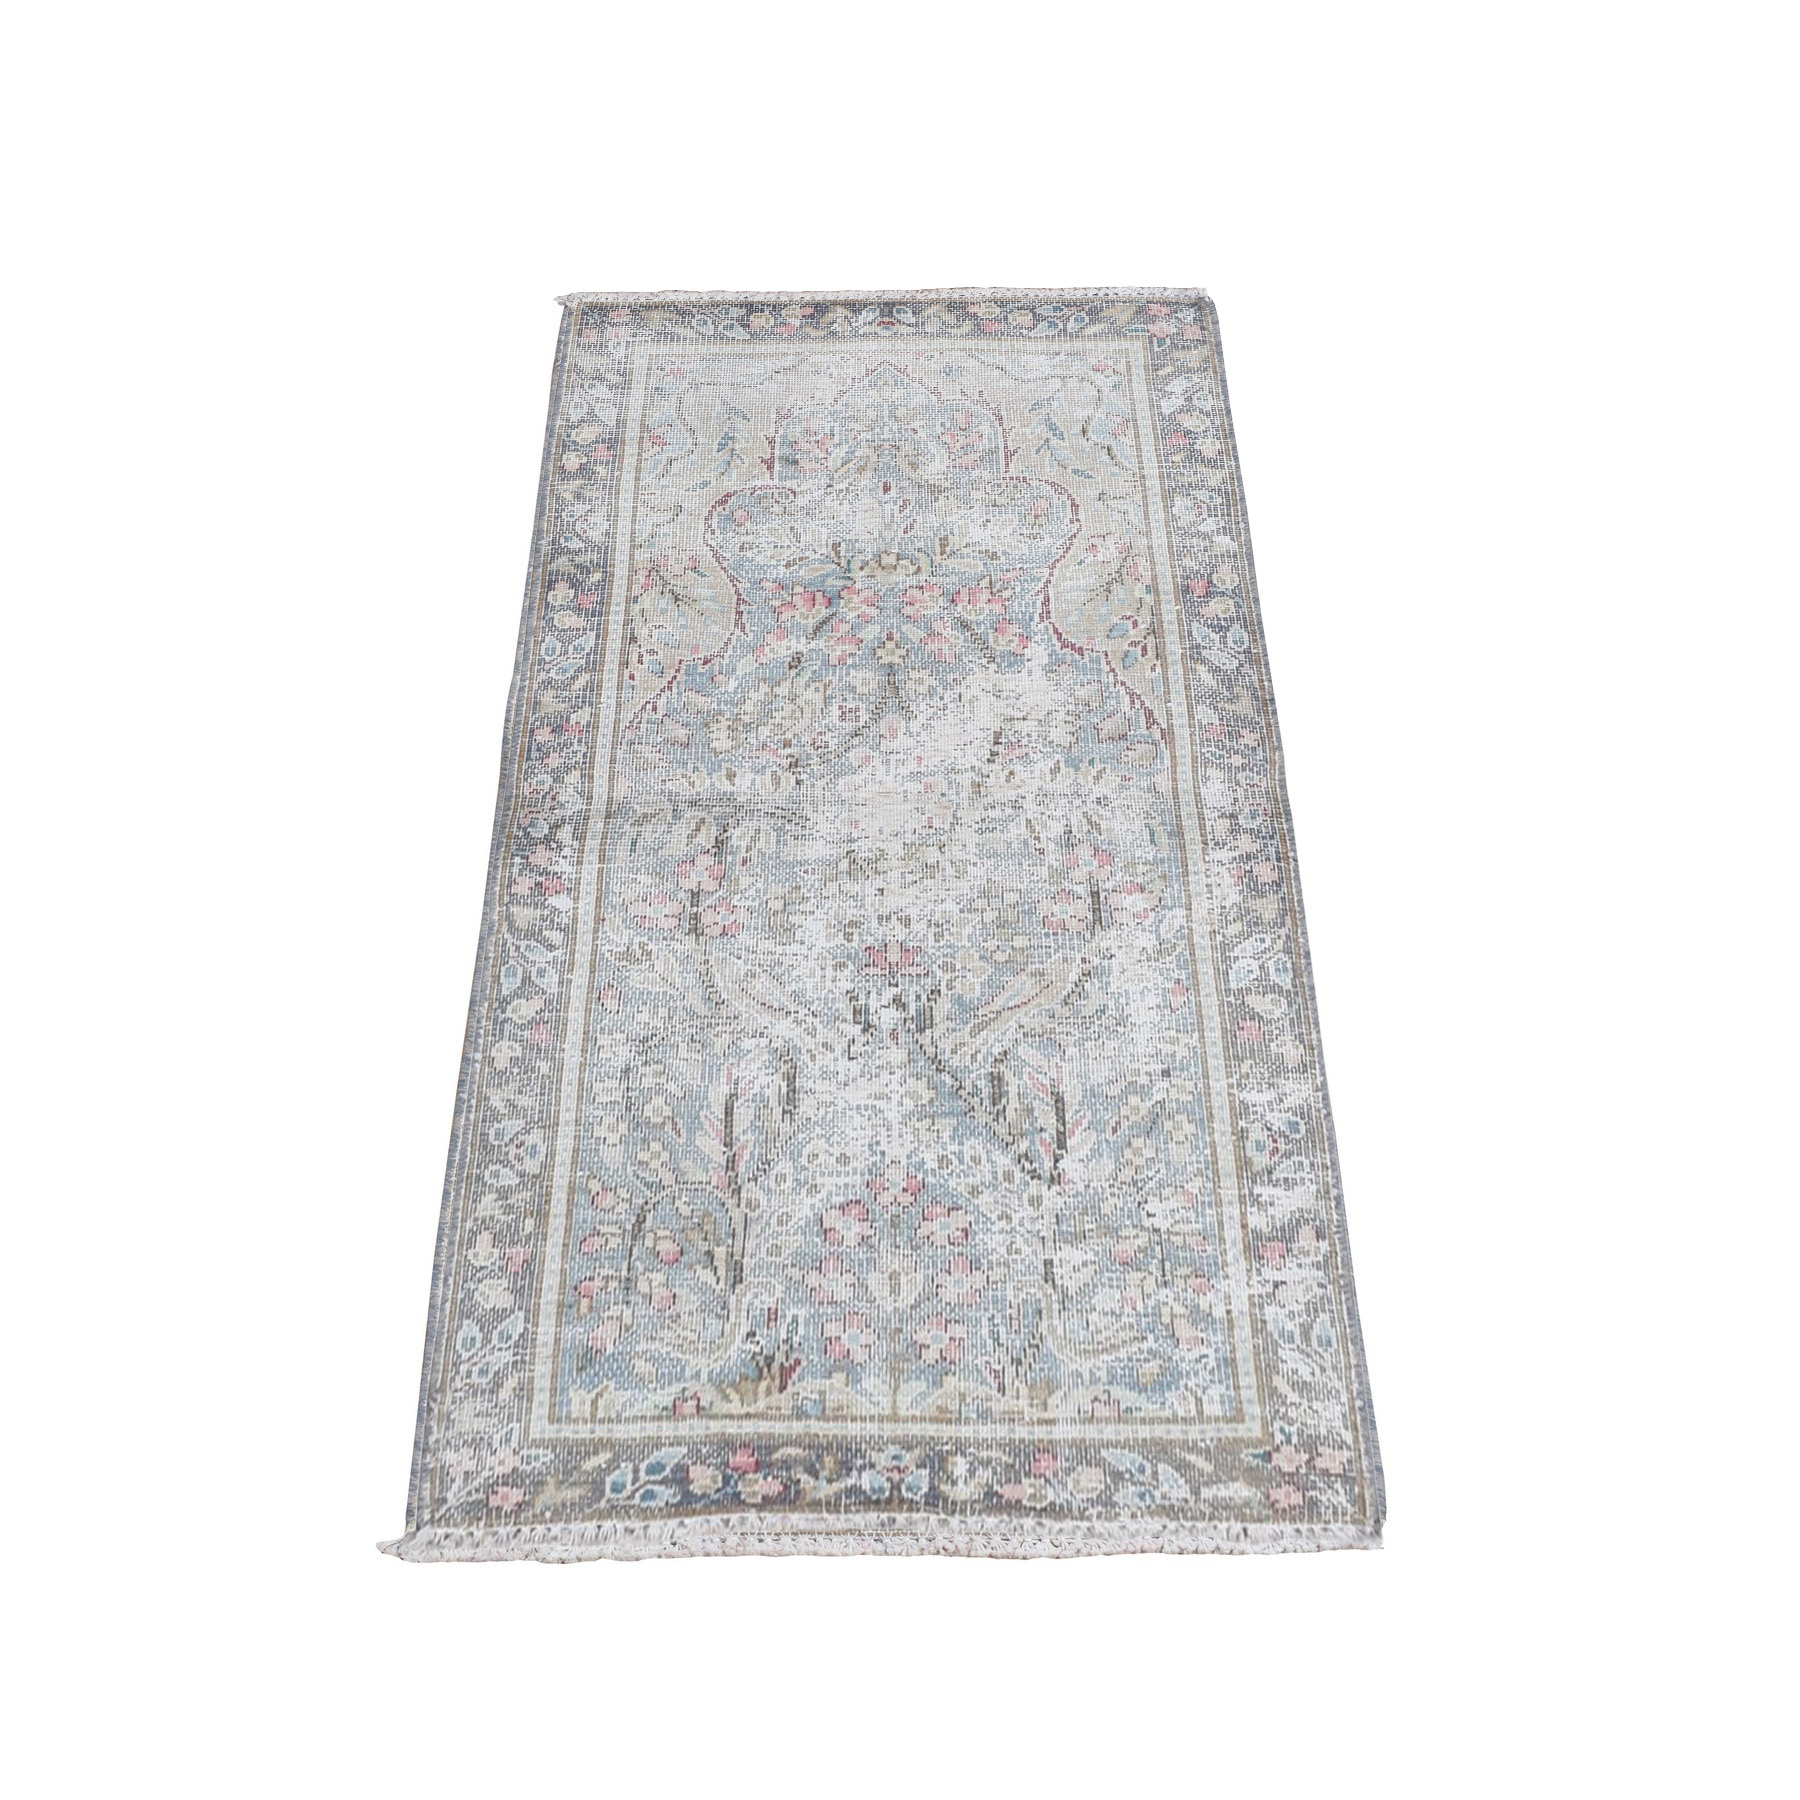  Wool Hand-Knotted Area Rug 1'10